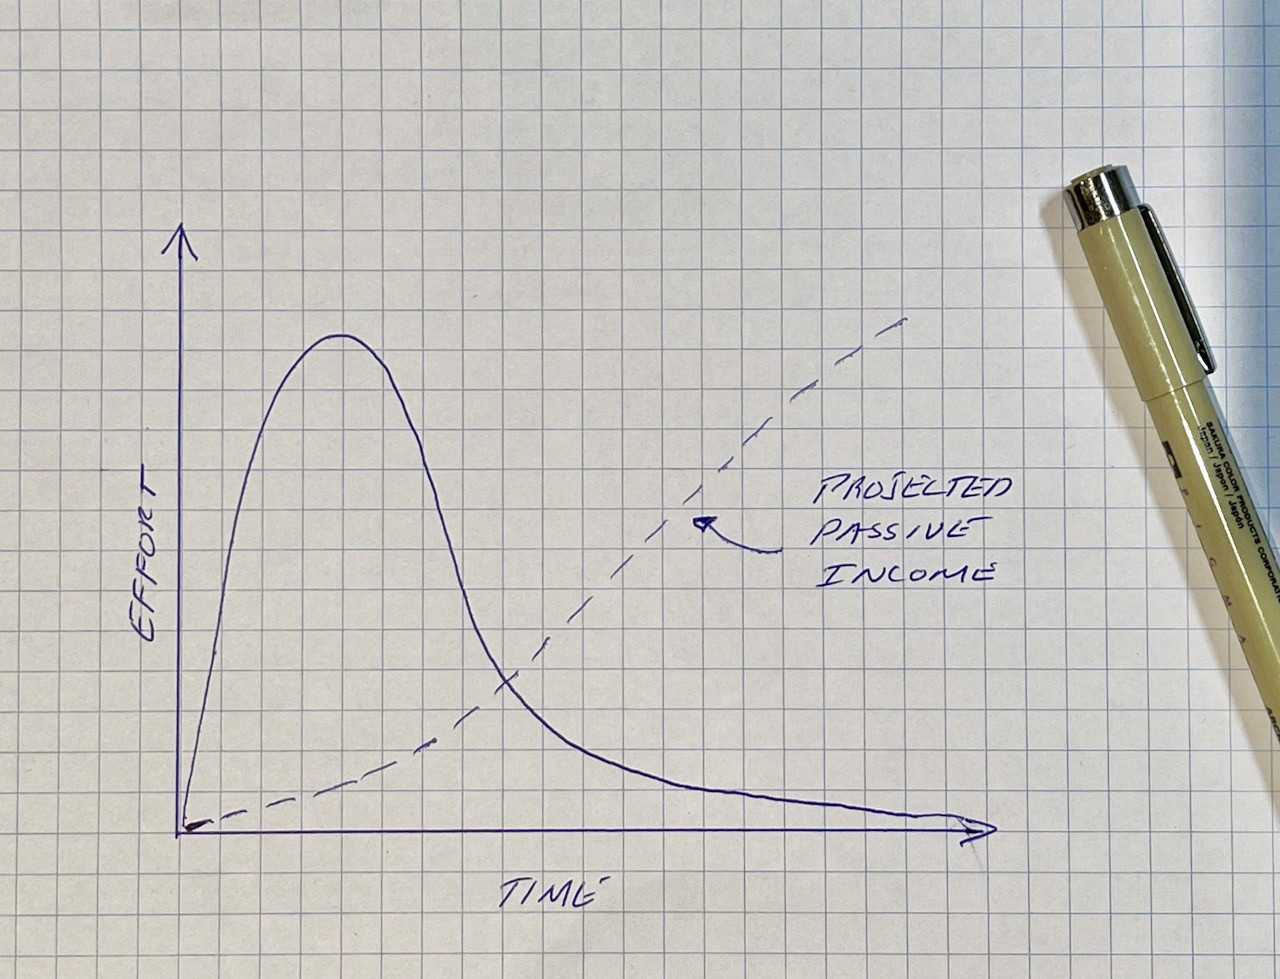 Graph with time and effort axes, depicting projected income ideas graph, and a golden pen placed on the graph page